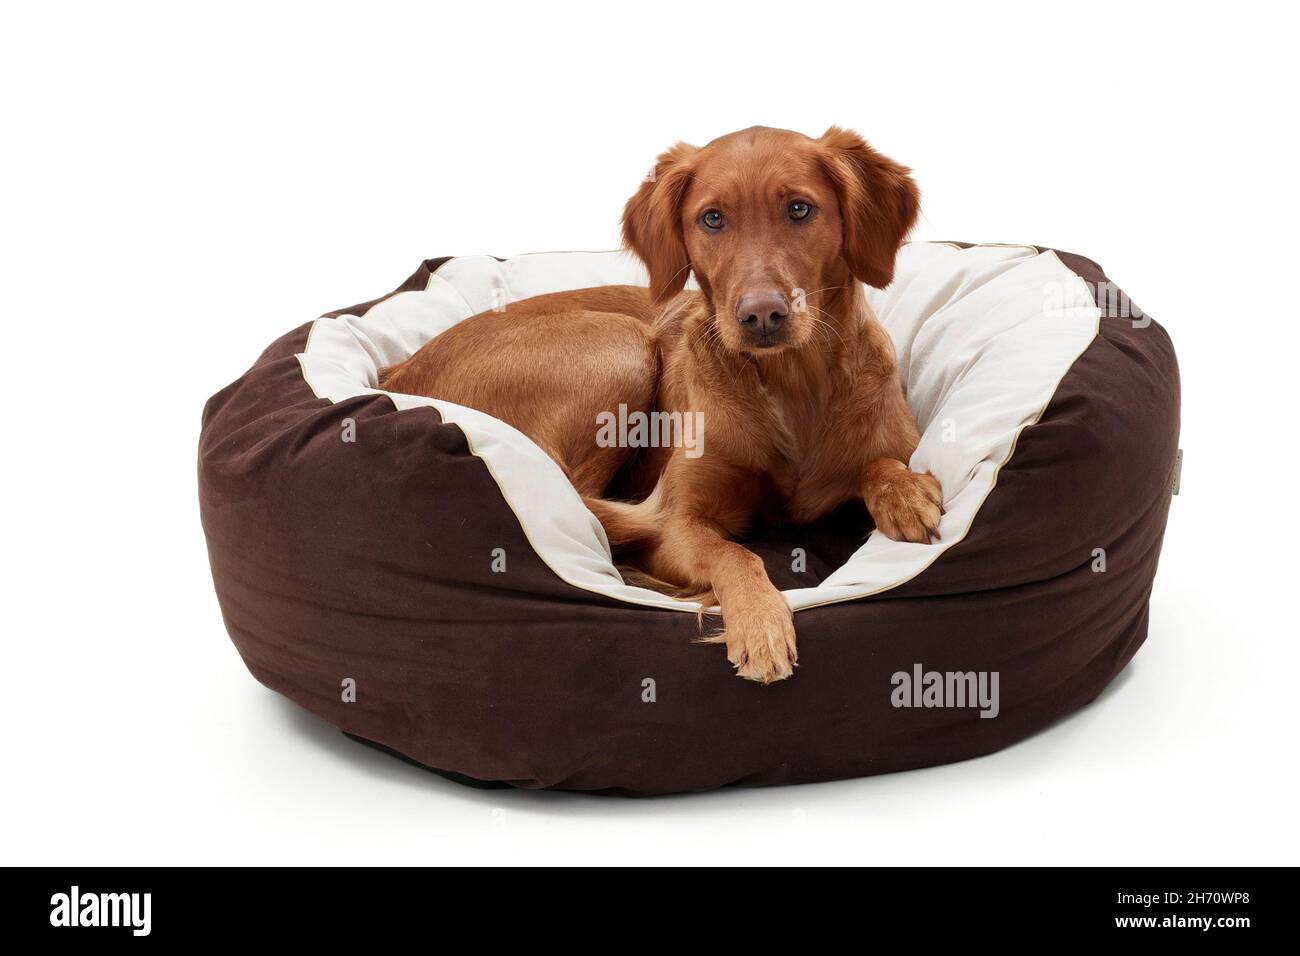 Golden Retriever. An adult dog lies in a dog bed. Studio picture against a white background. Germany... Stock Photo